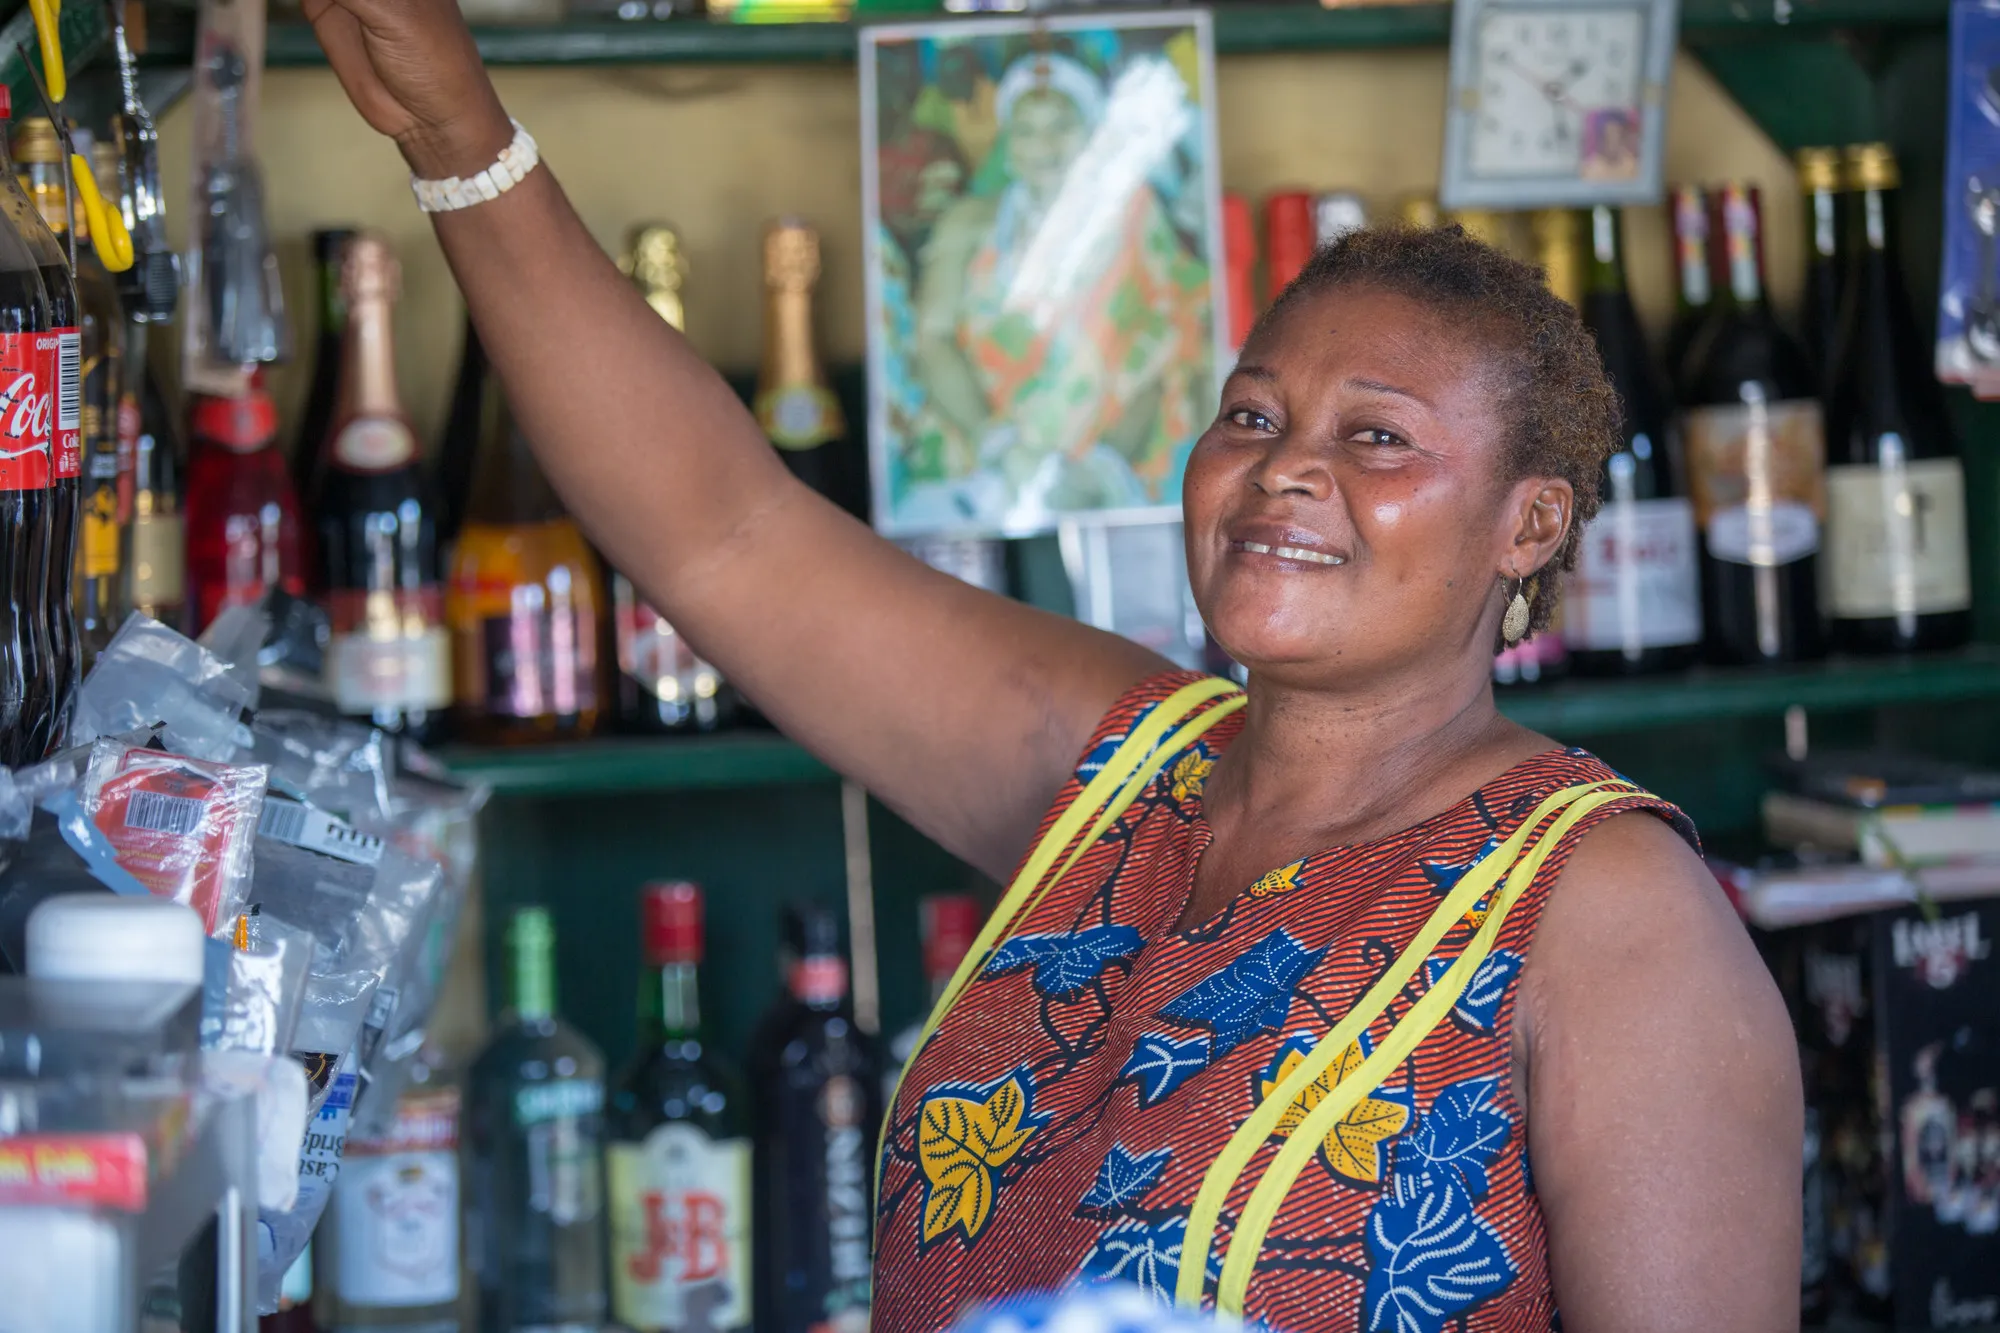 A woman smiles while reaching up to a shelf in a bar.